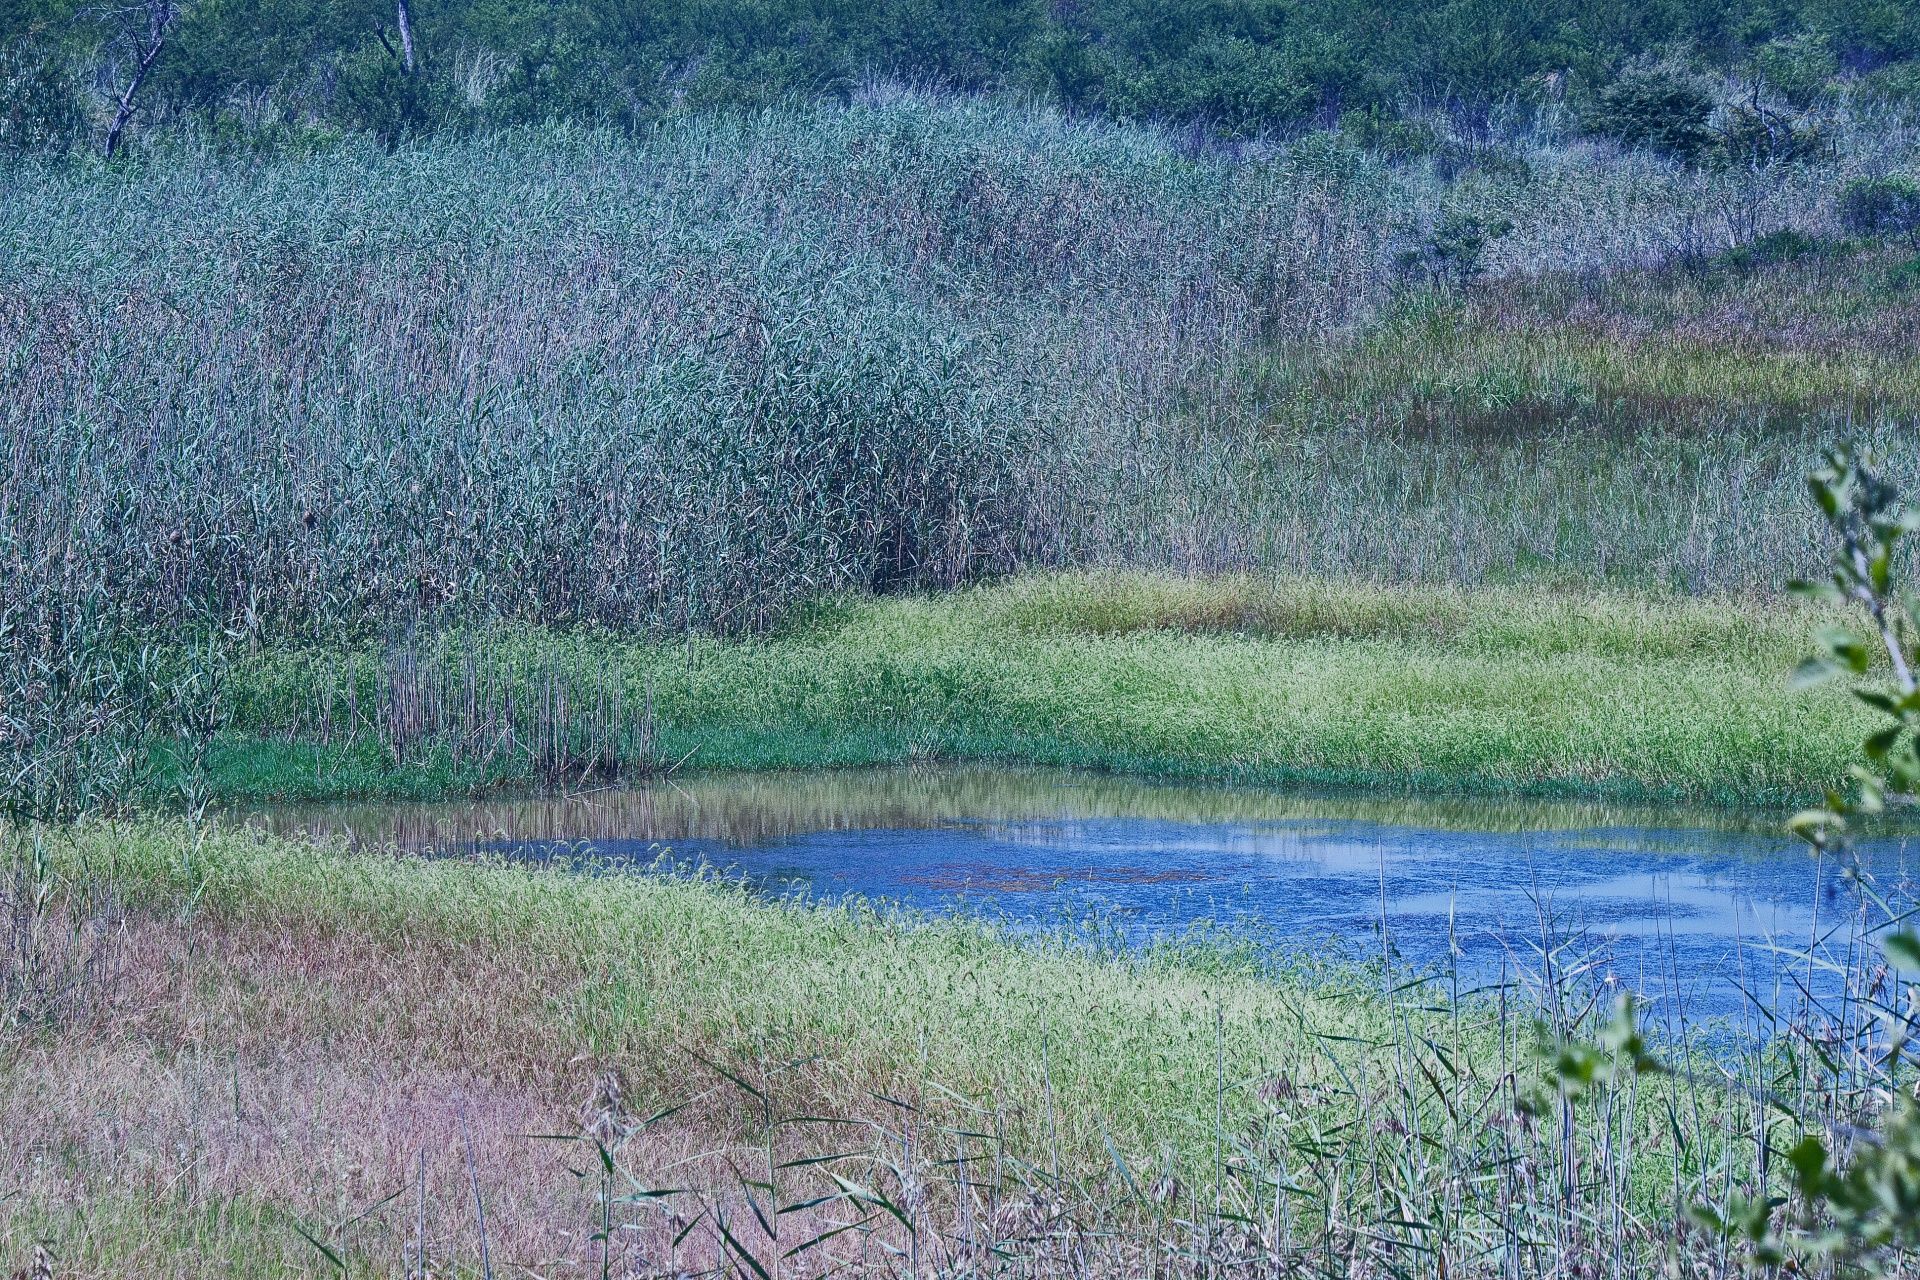 dam with copious amounts of reeds growing in wet areas